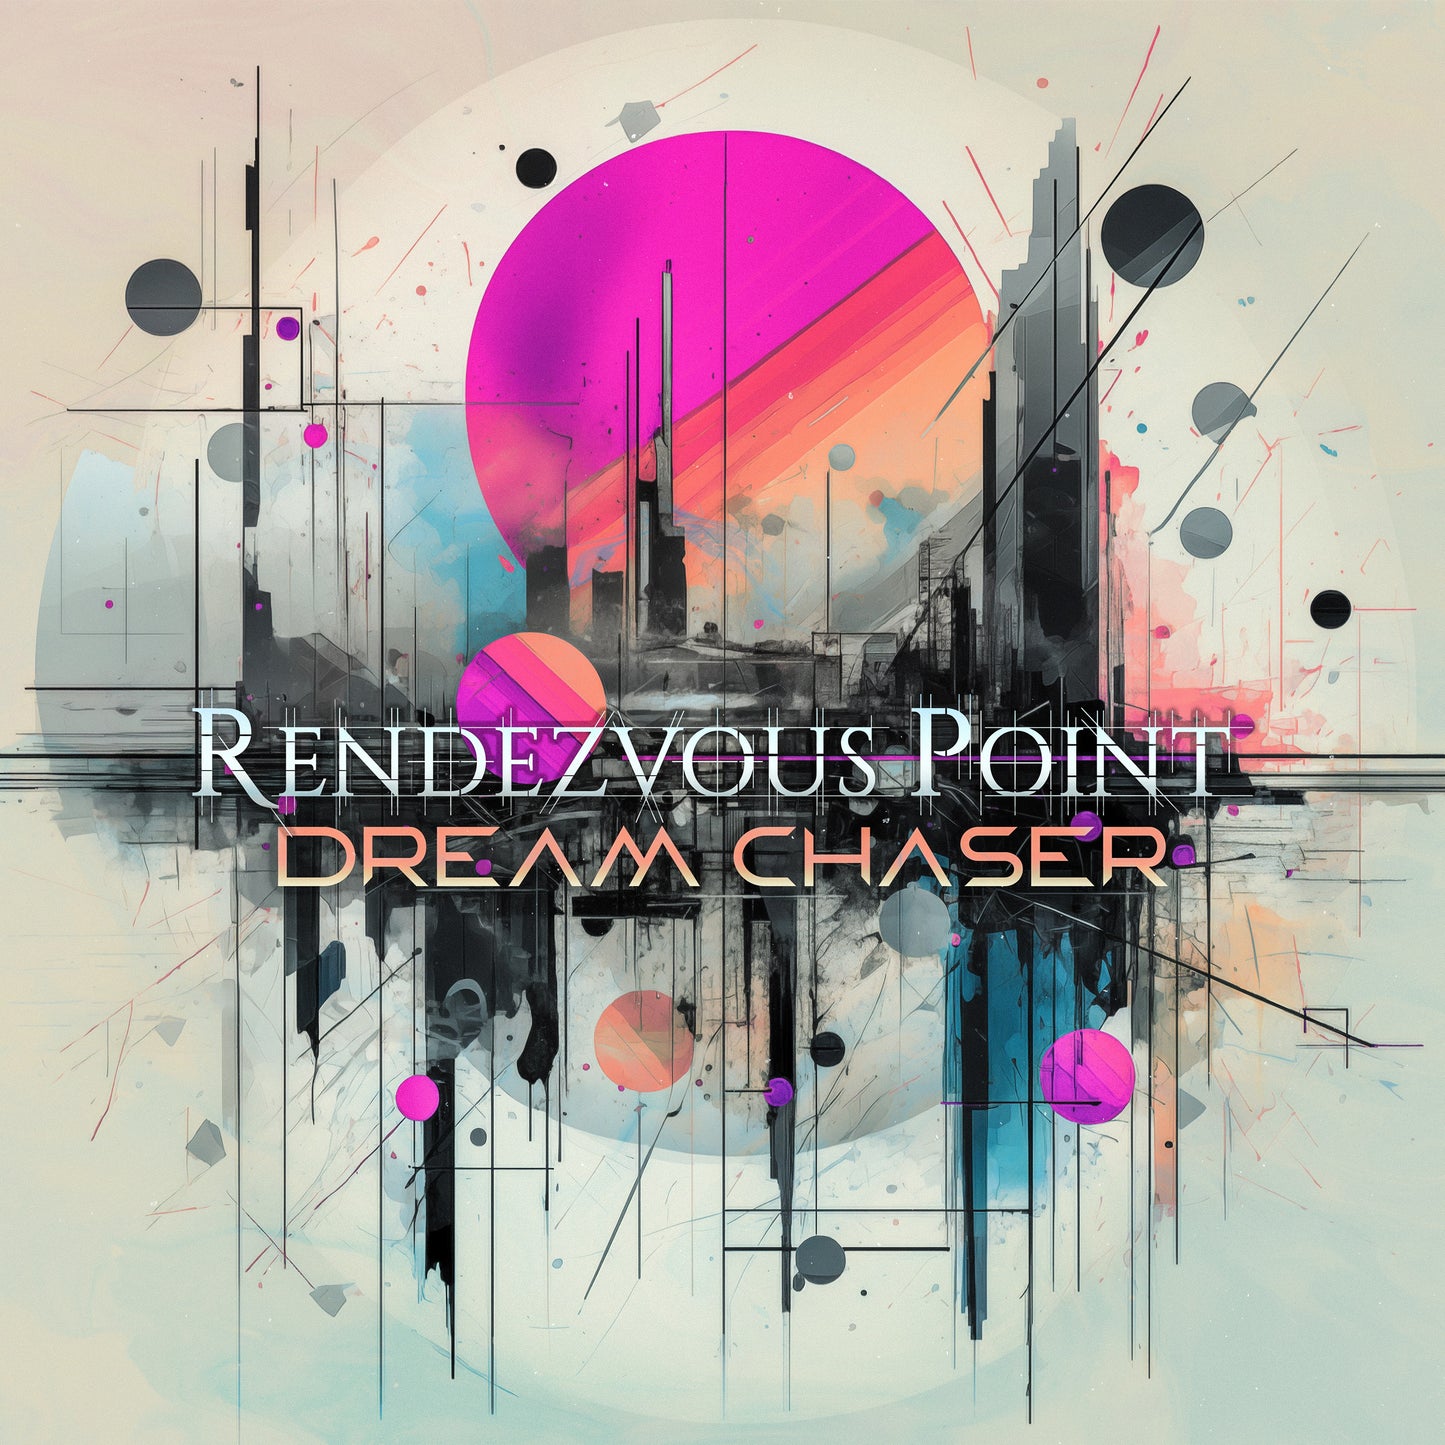 Rendezvous Point "Dream Chaser" CD-Bundle "Wildflower"